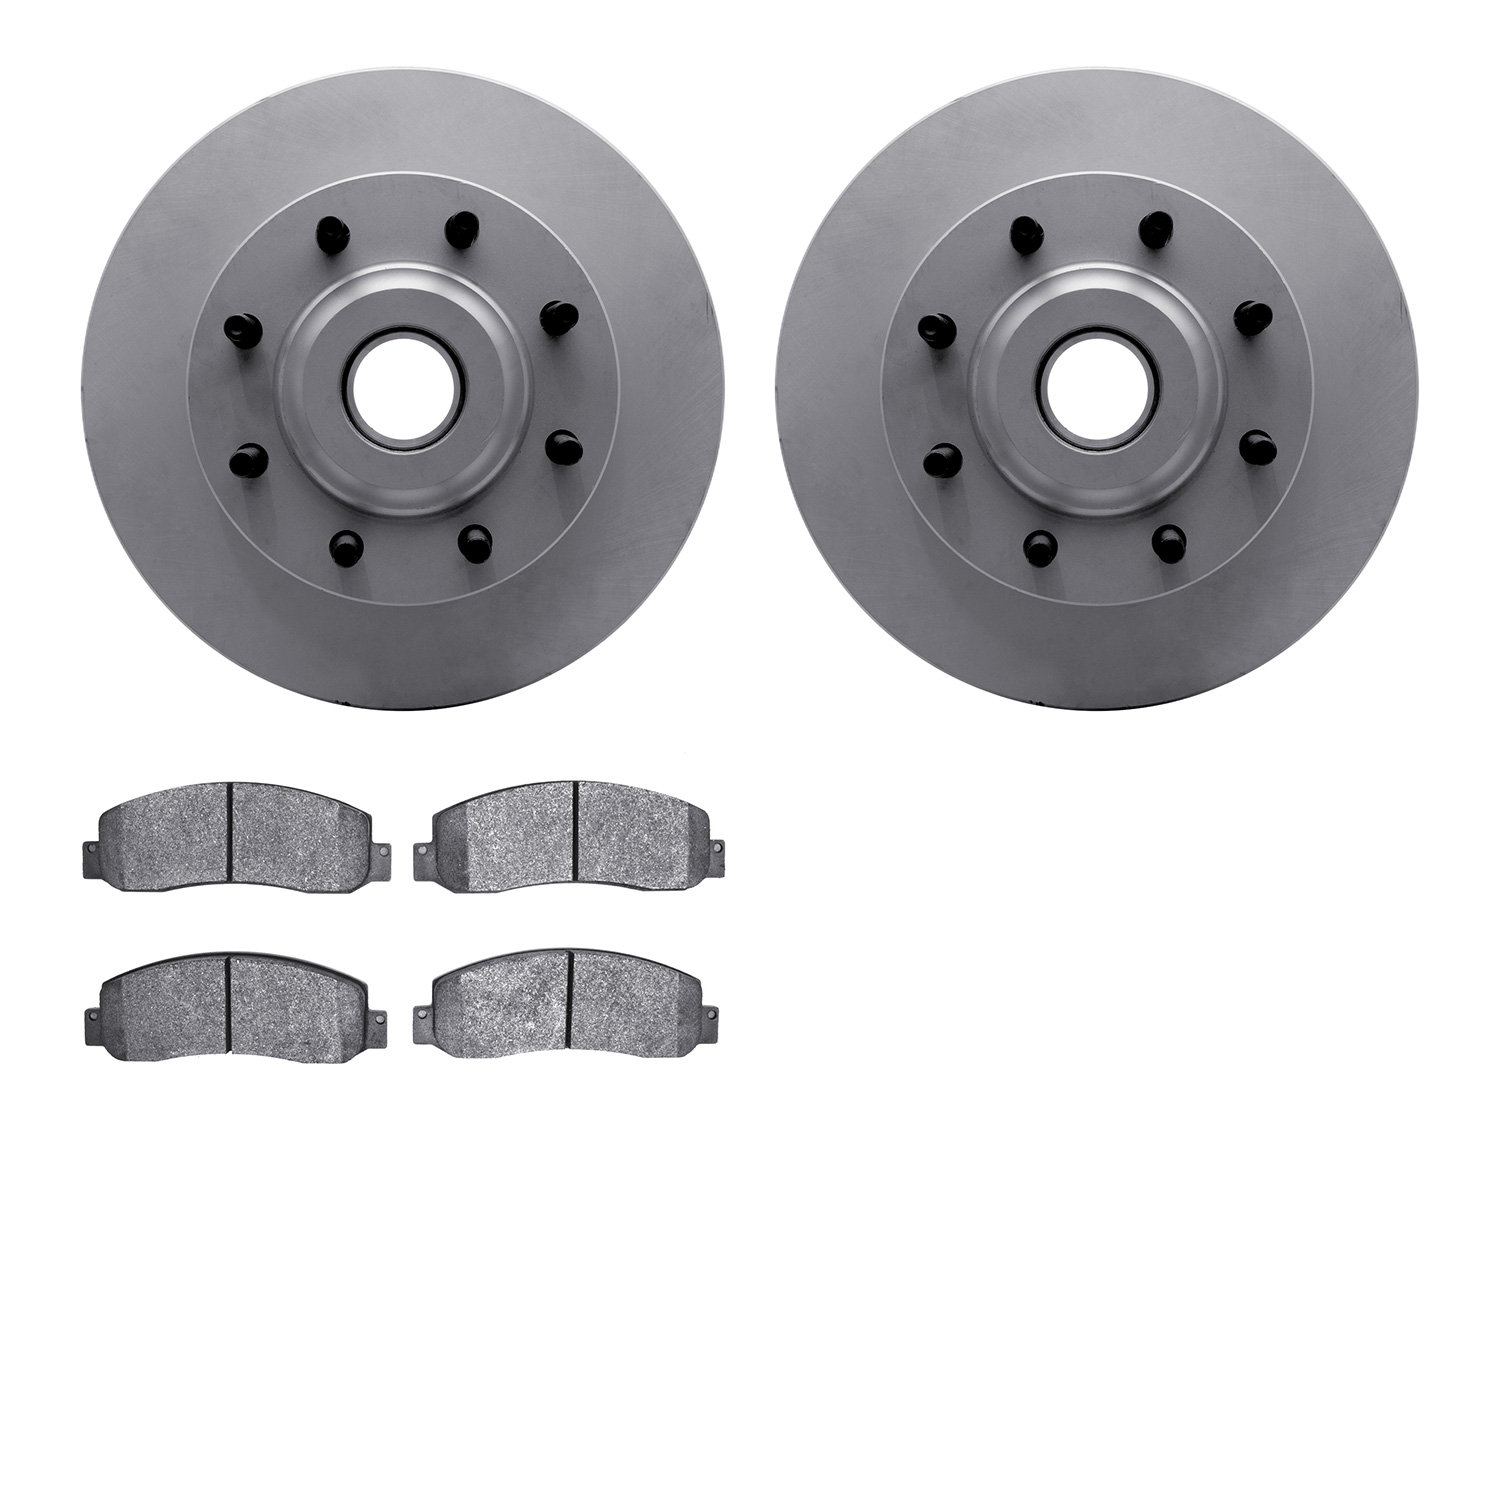 4402-54060 Geospec Brake Rotors with Ultimate-Duty Brake Pads Kit, 2005-2007 Ford/Lincoln/Mercury/Mazda, Position: Front